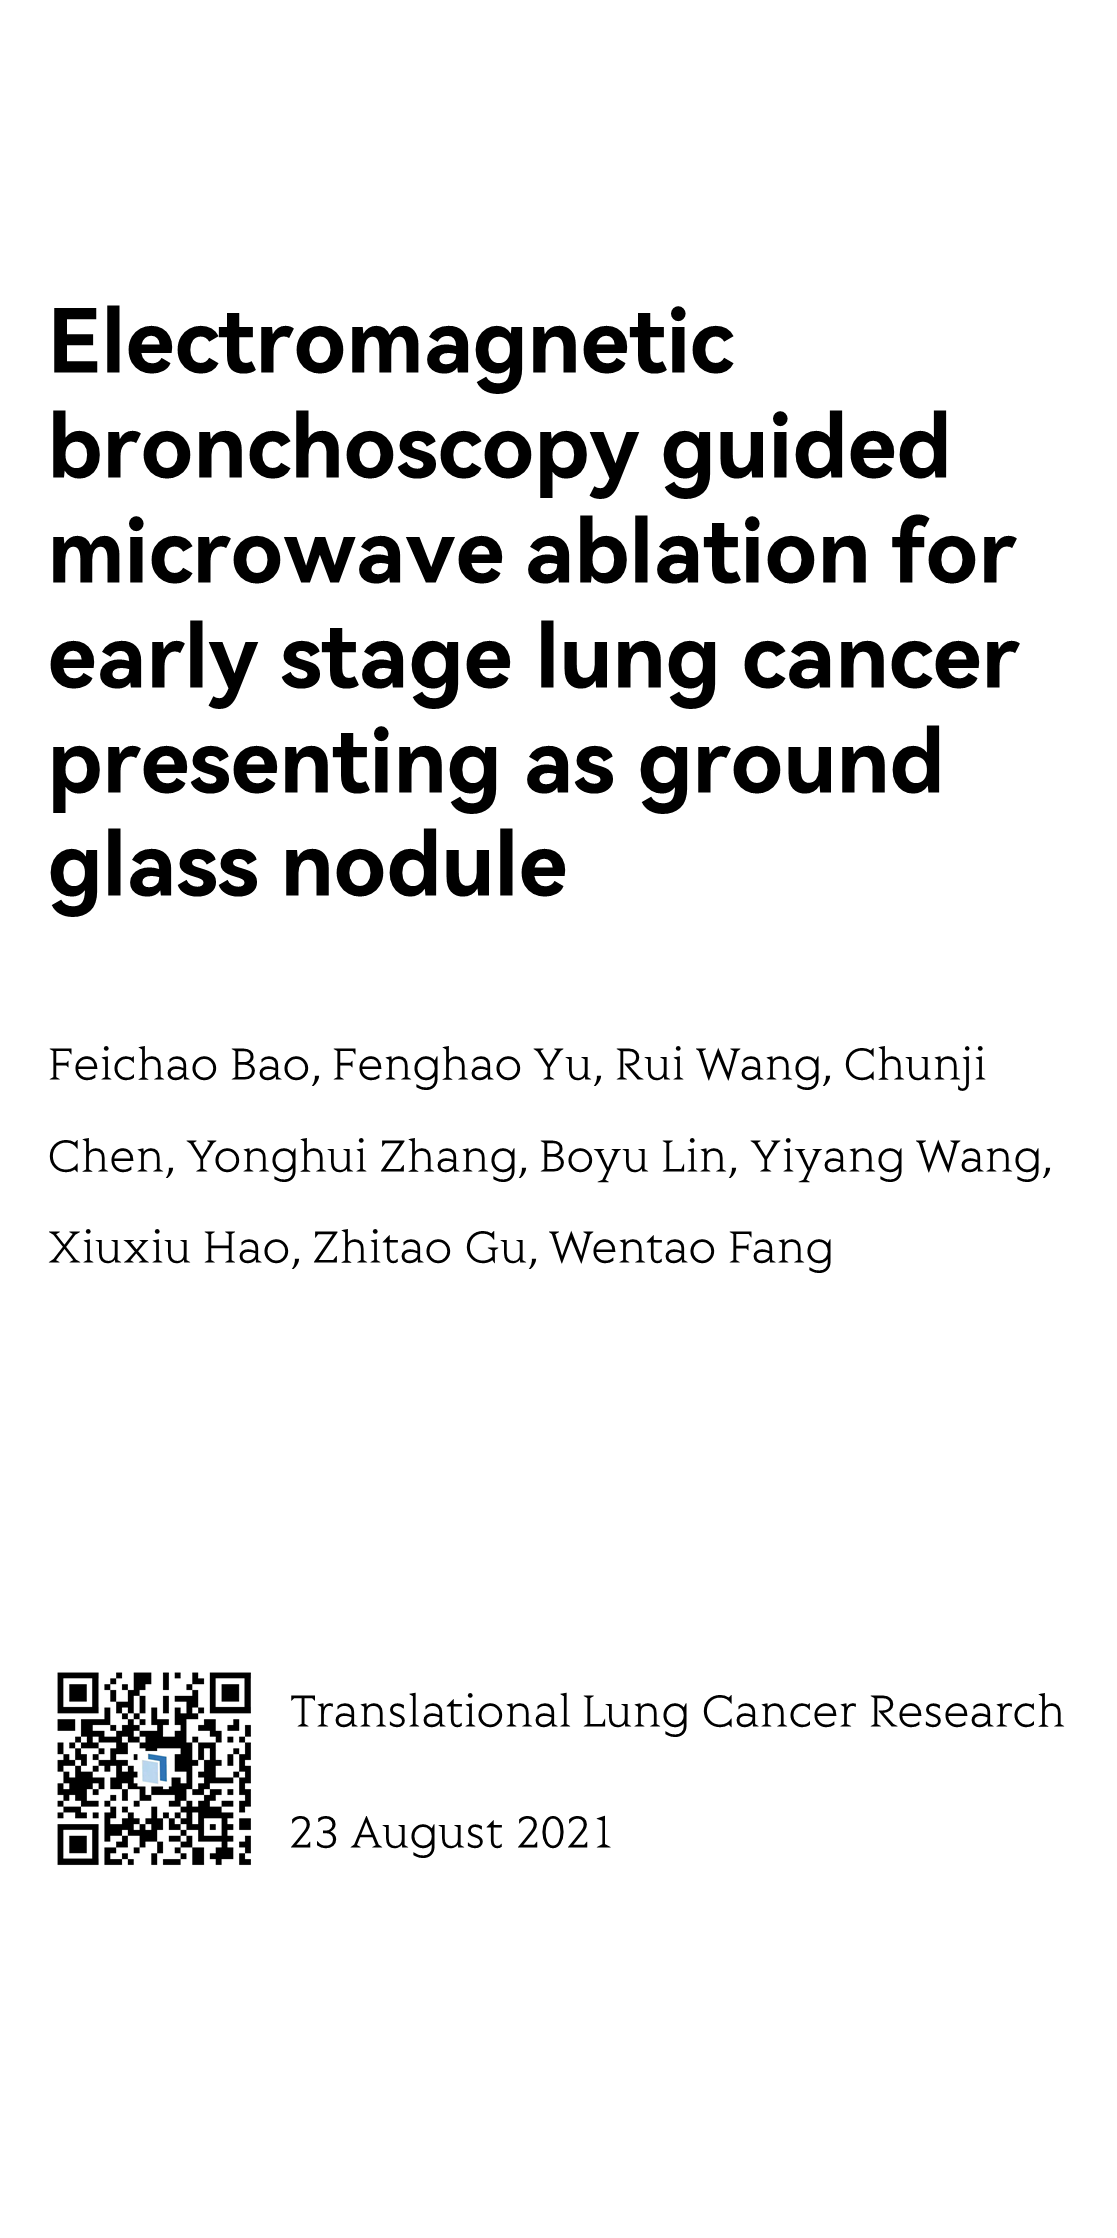 Electromagnetic bronchoscopy guided microwave ablation for early stage lung cancer presenting as ground glass nodule_1